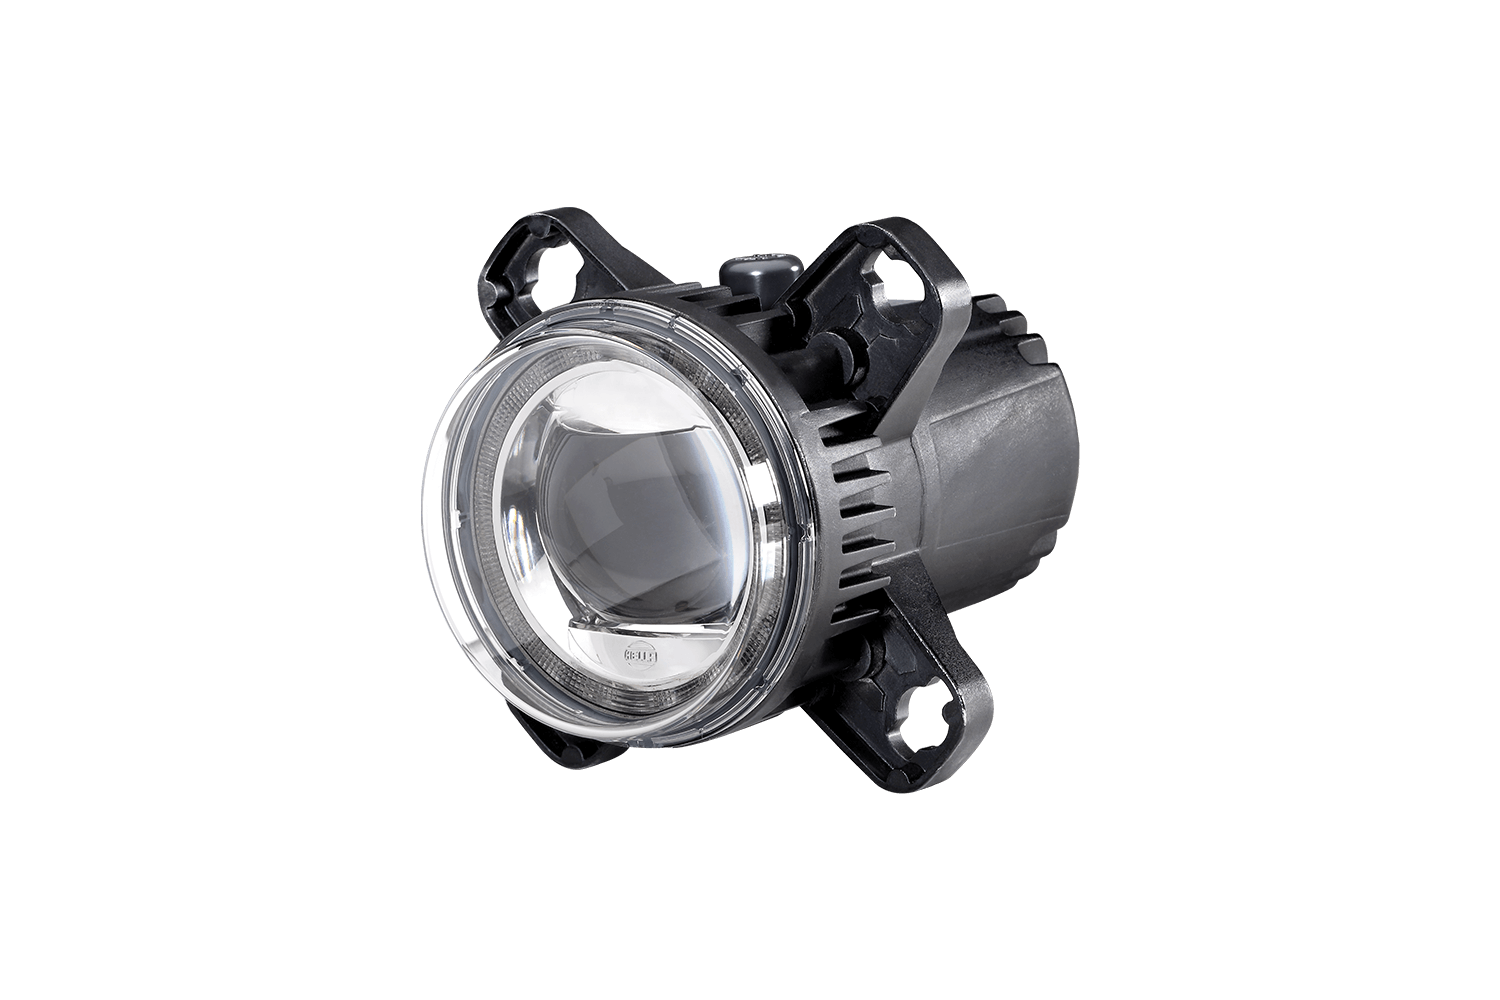 L 4060 LED low beam headlamp from Hella offered by Patlon in Canada